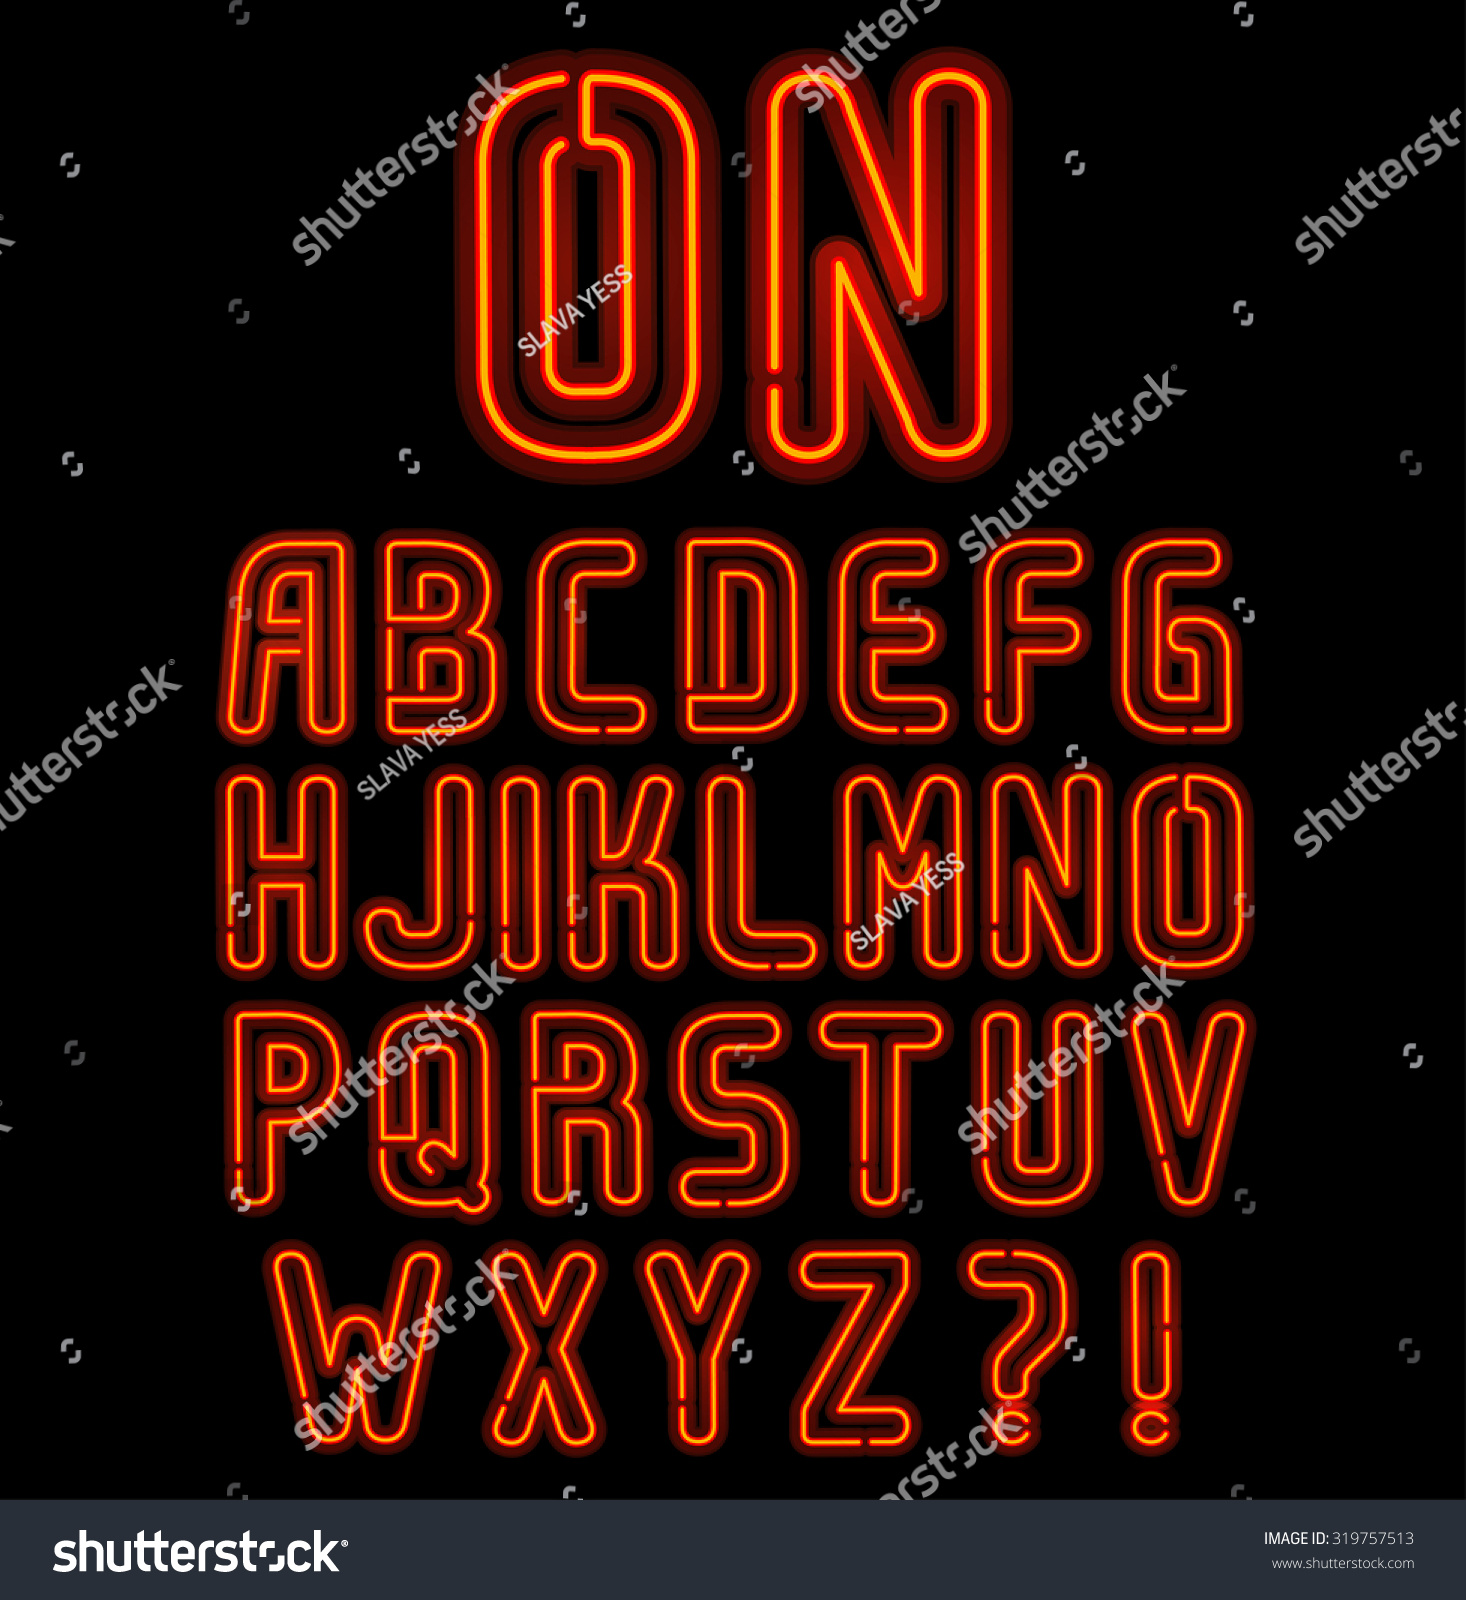 Red Neon Font Part 1 Of 2, Complete Alphabet Stock Vector Illustration ...